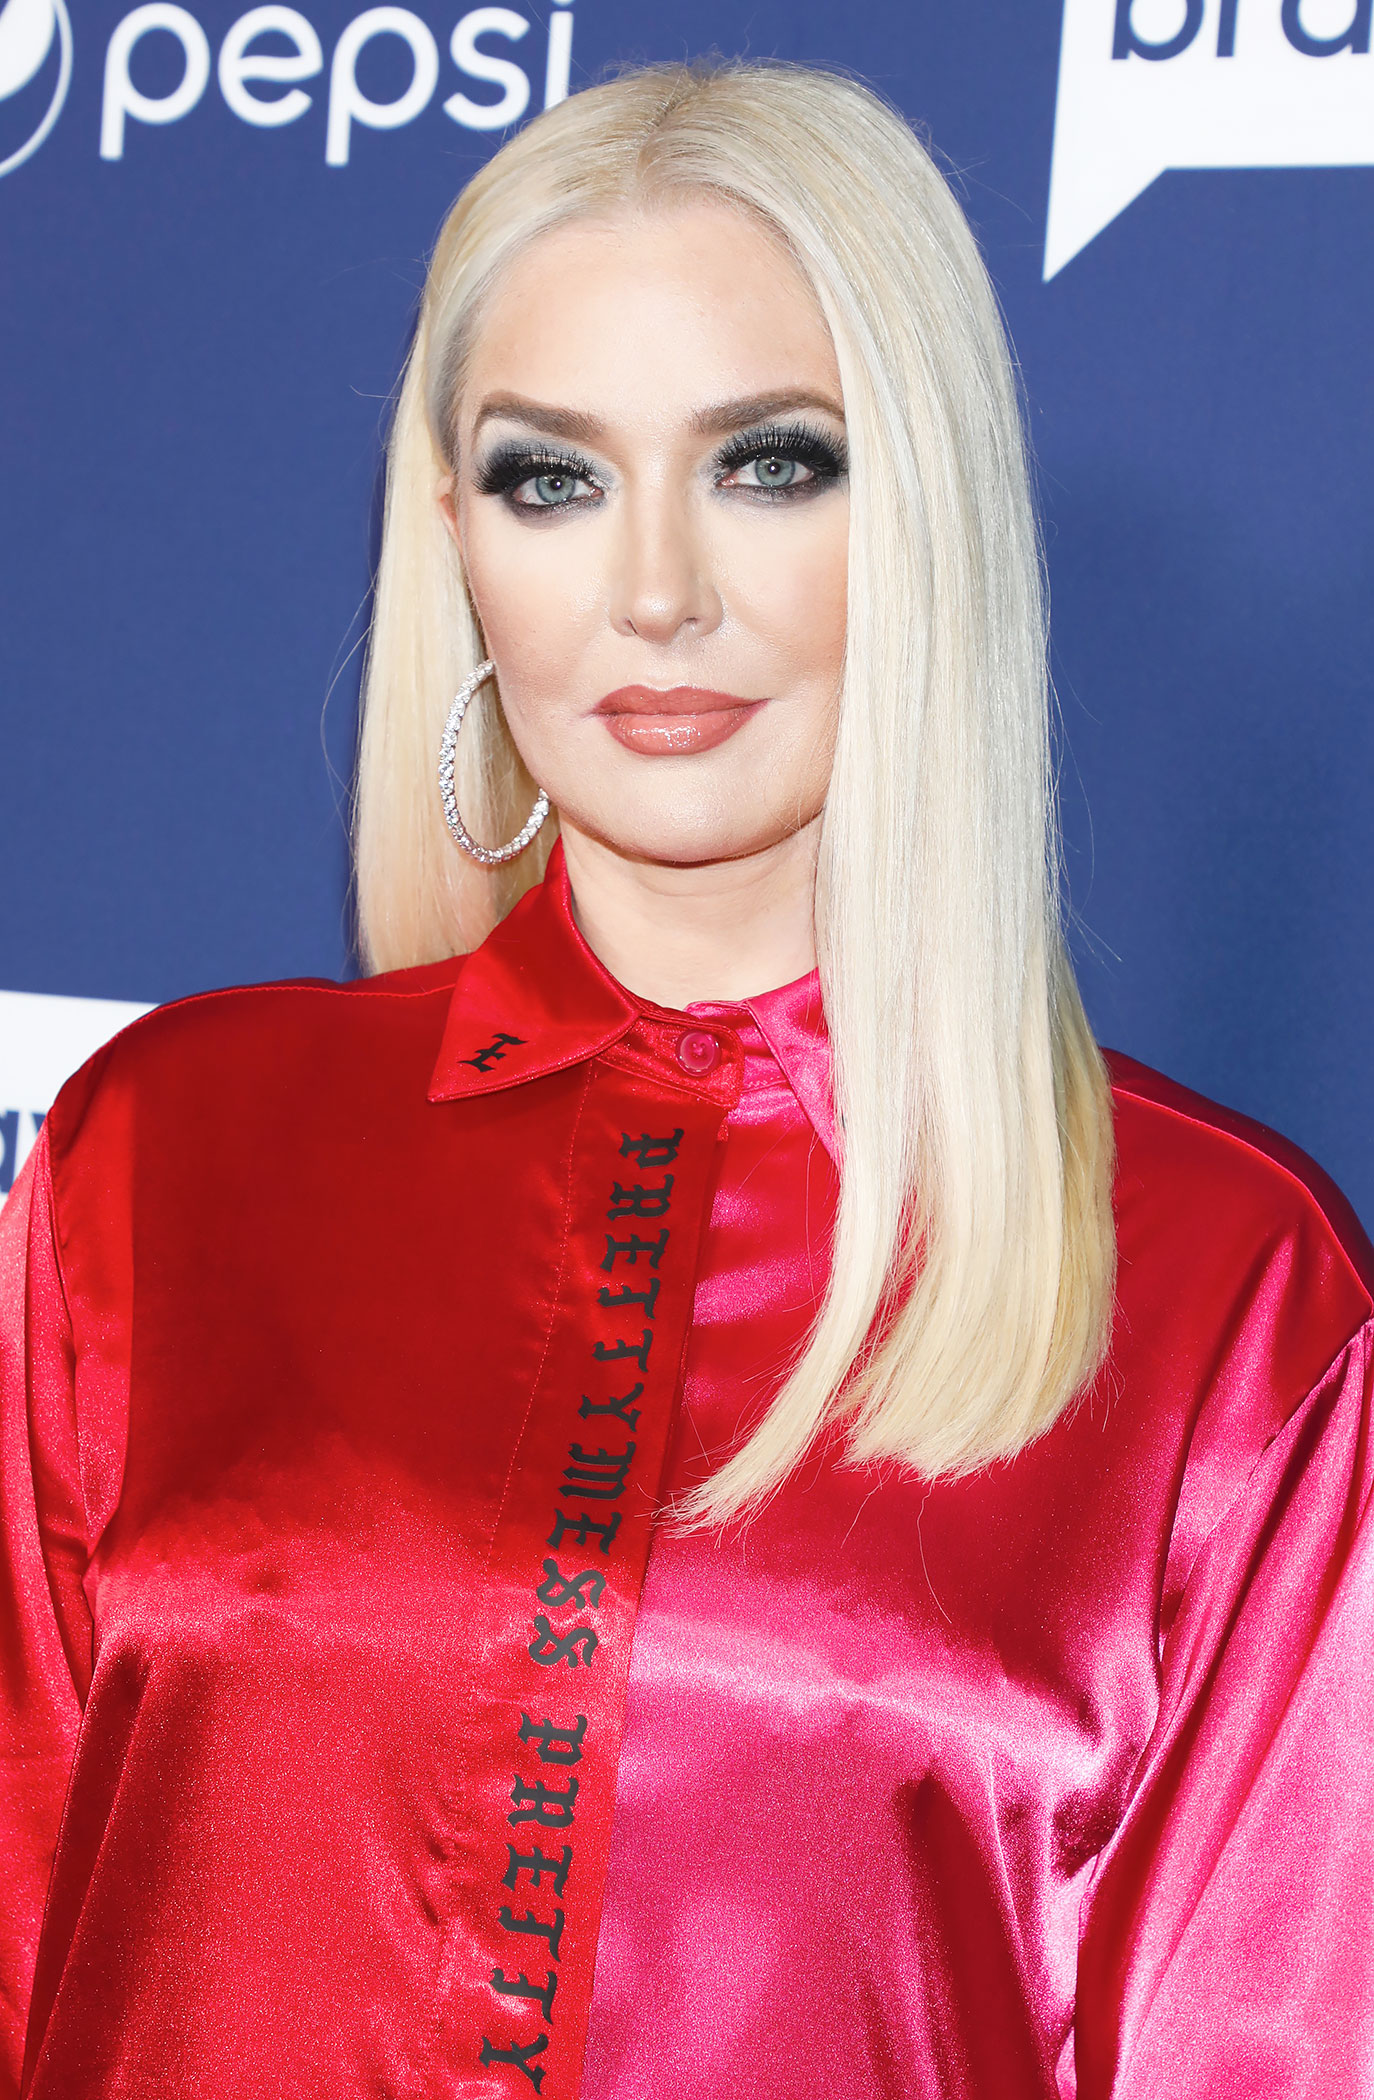 Erika Jayne is embraces low-key glam as she gets back to business